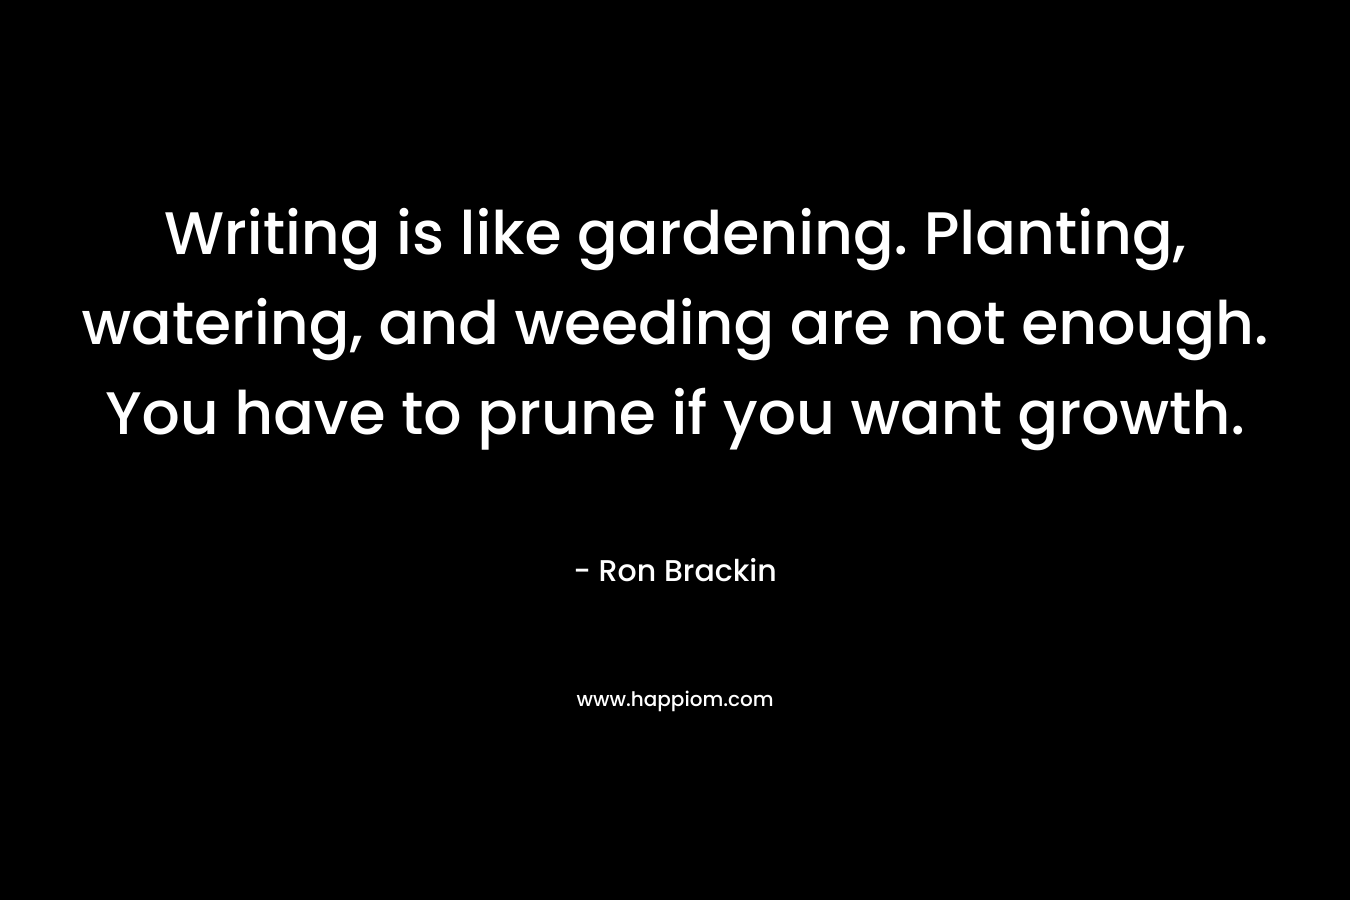 Writing is like gardening. Planting, watering, and weeding are not enough. You have to prune if you want growth. – Ron Brackin